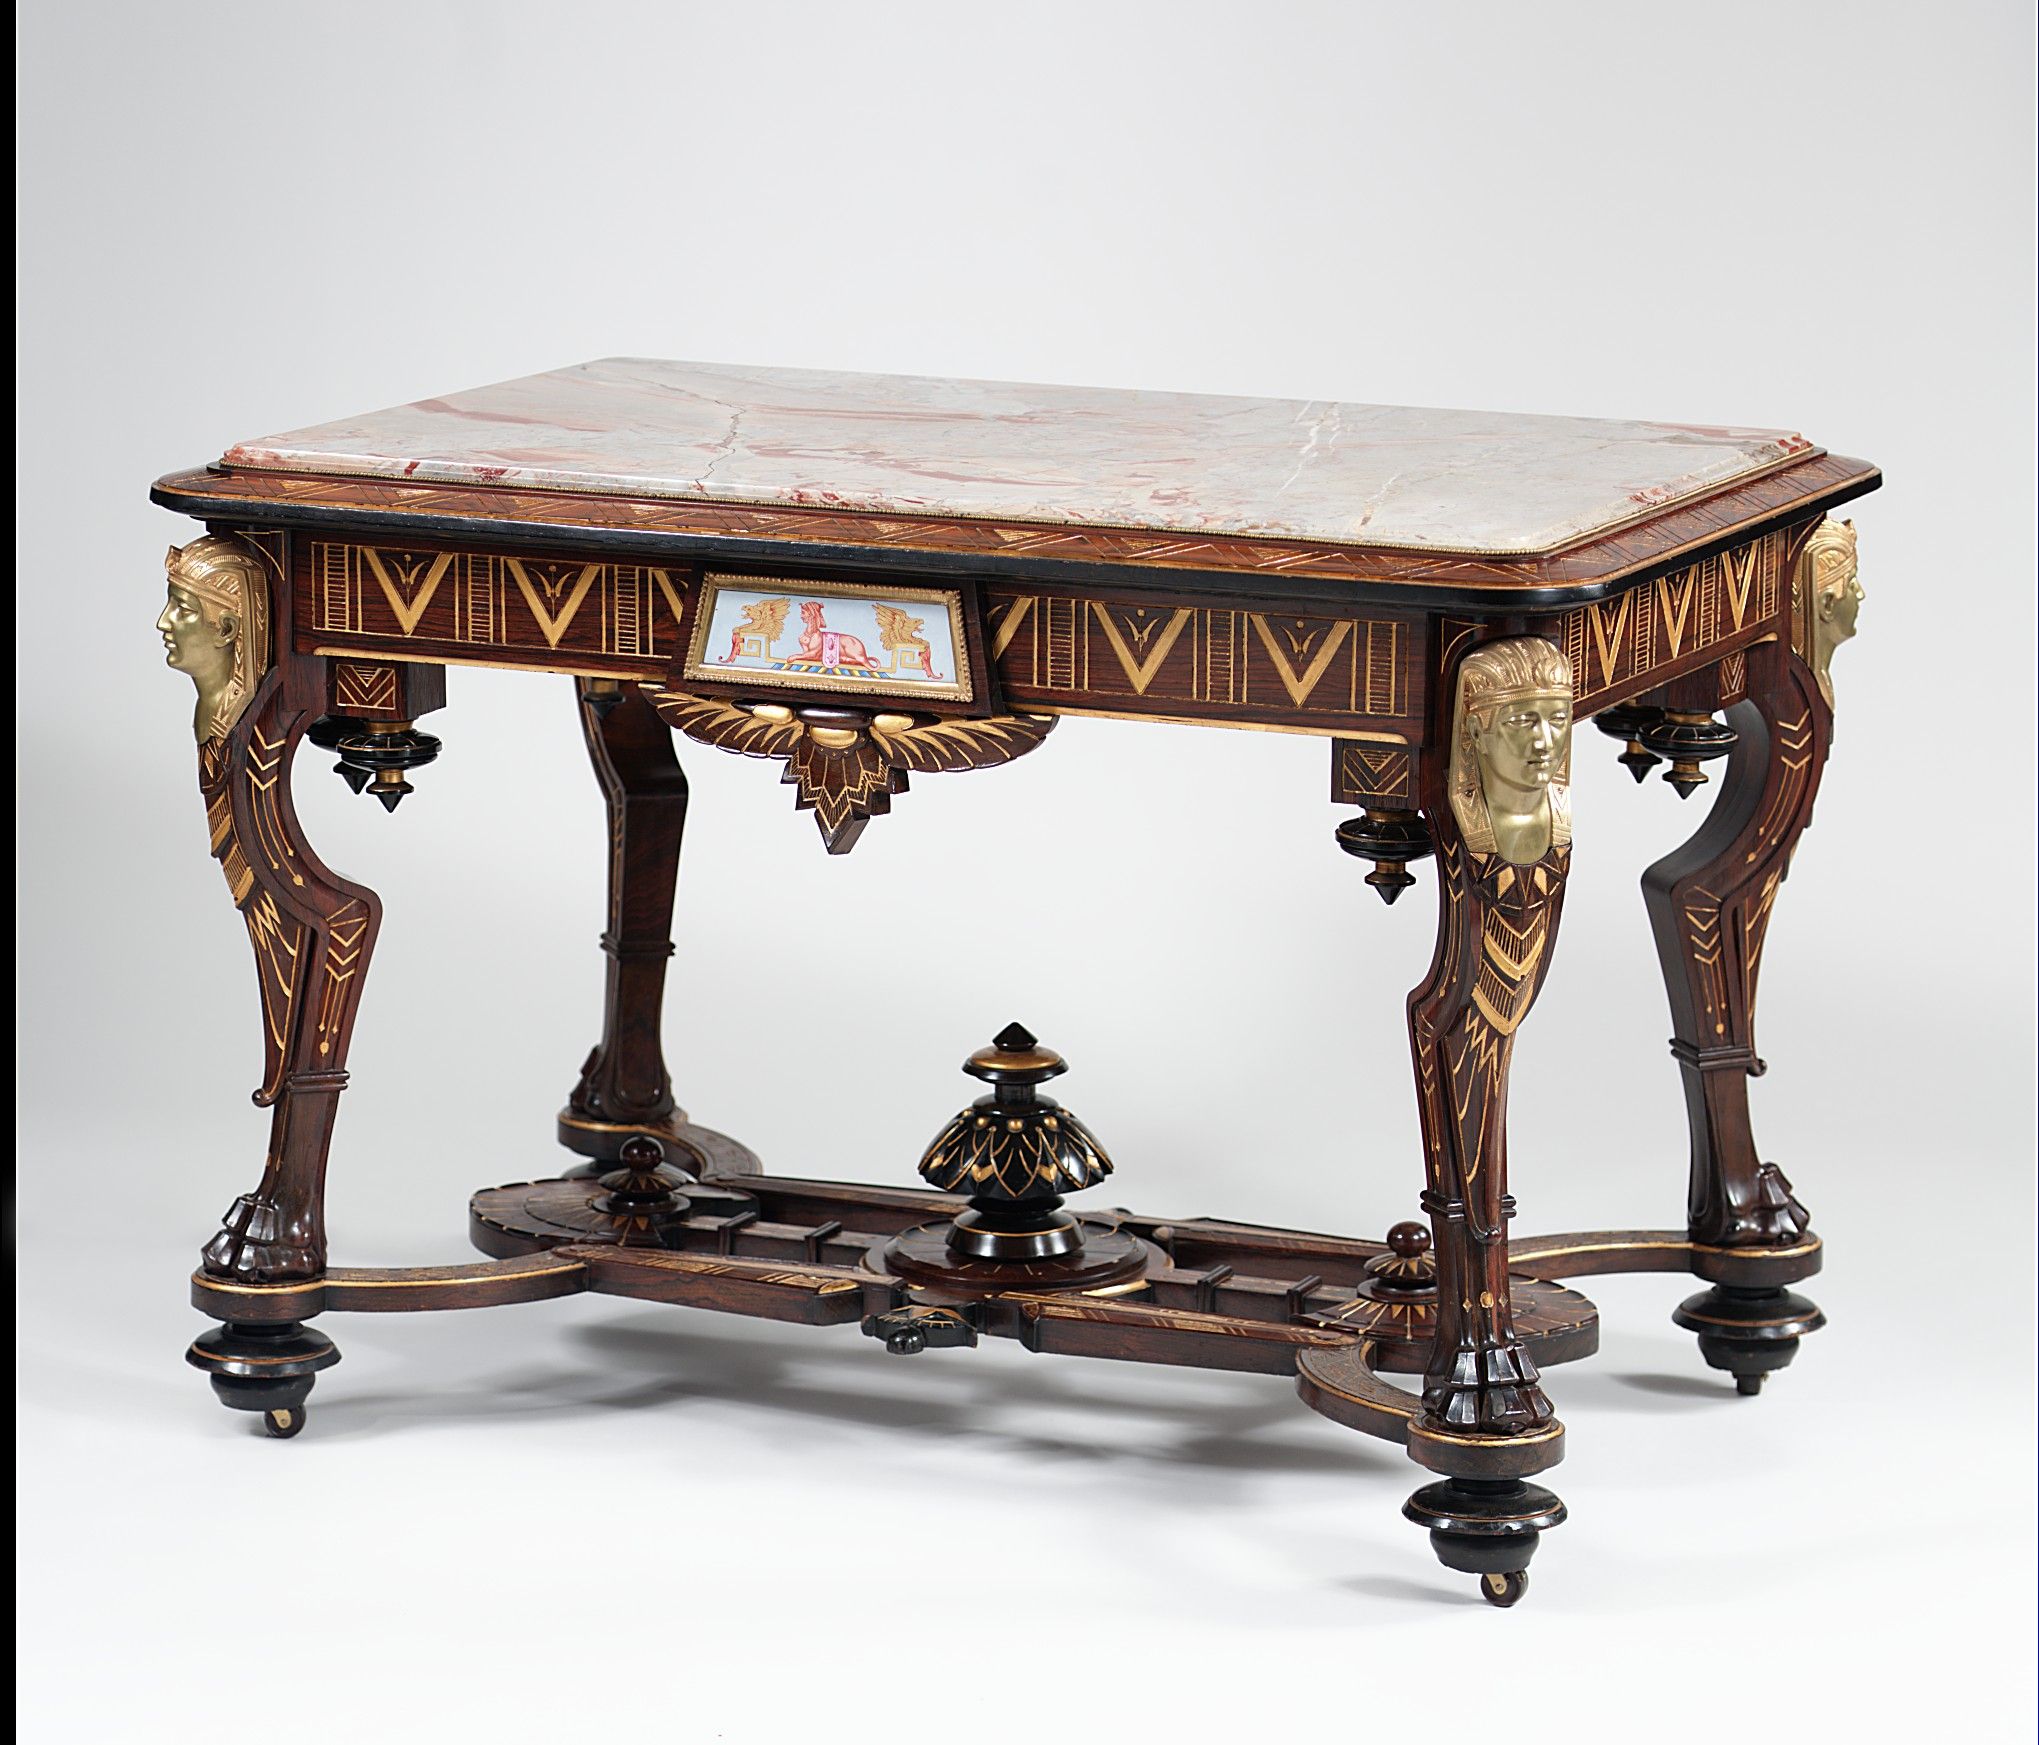 Center Table, 1870–75, Attributed to Pottier and Stymus Manufacturing Company, NYC.